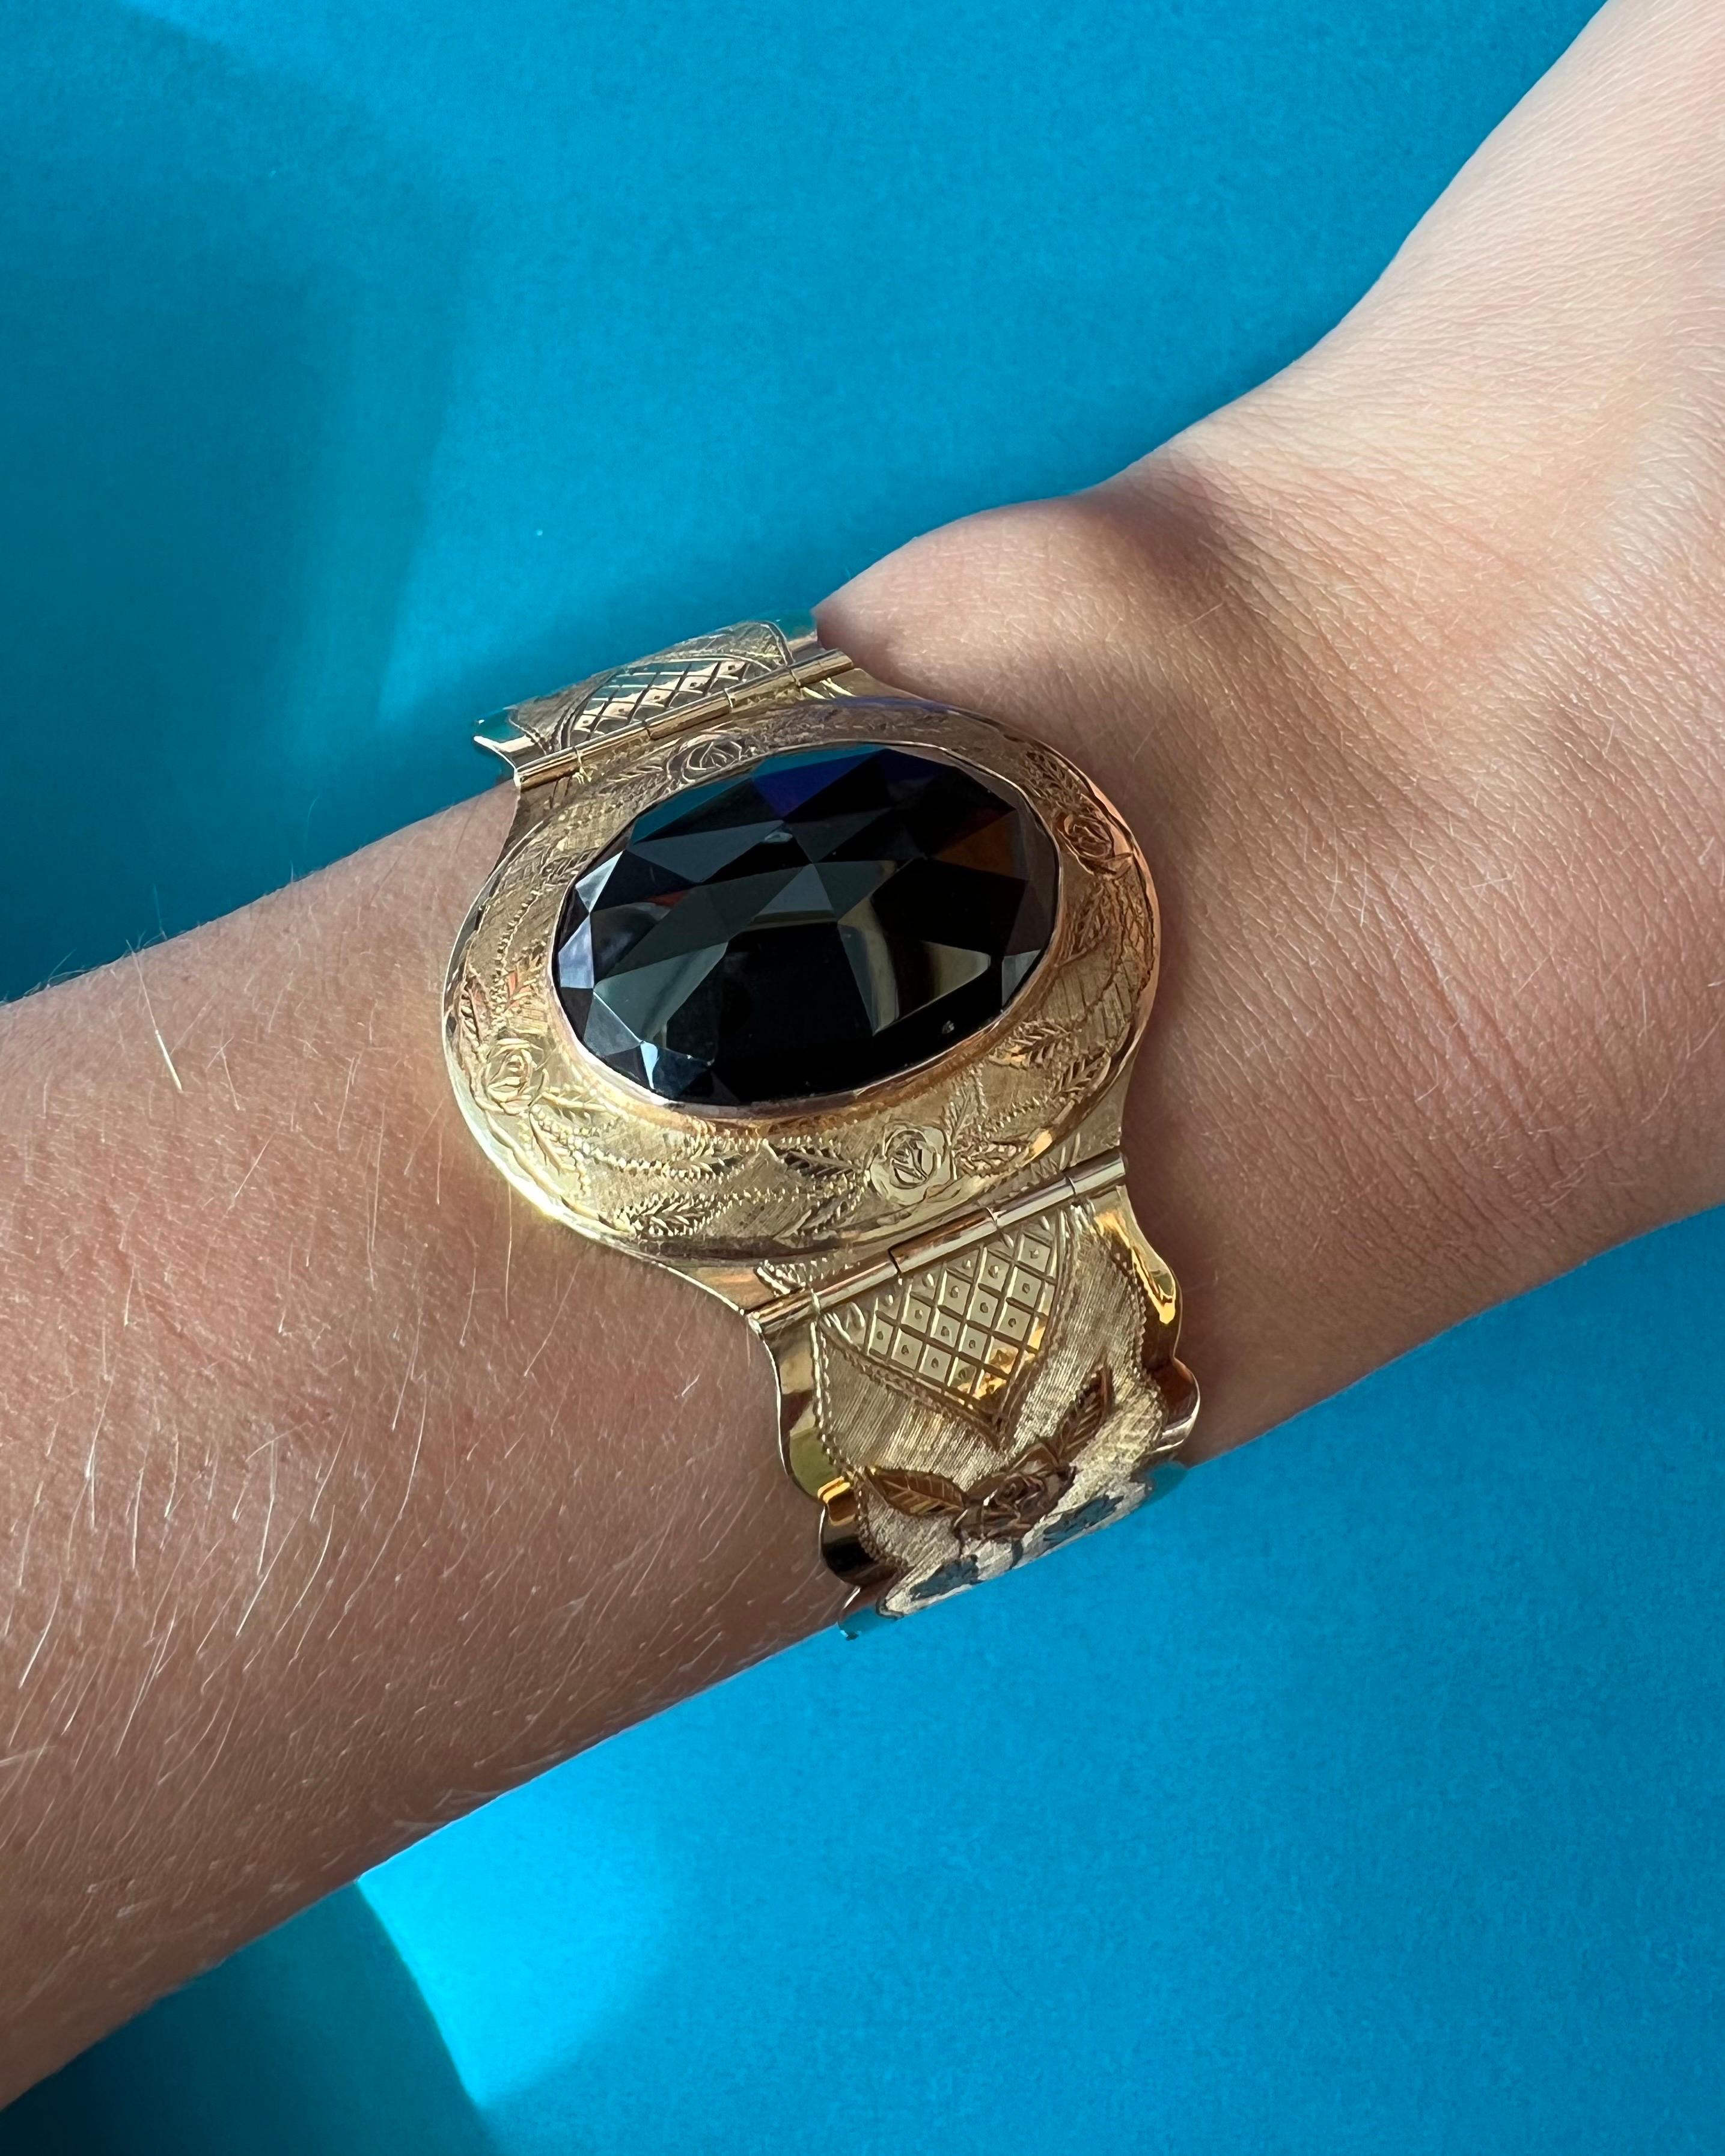 A beautiful bracelet from the Late Victorian era, circa 1870s-1890s. Made from 14 karat rose gold, the design has a gorgeous combination with the deeply colored rose cut Almandine garnet and the engraved gold. The band of the bracelet is hinged with